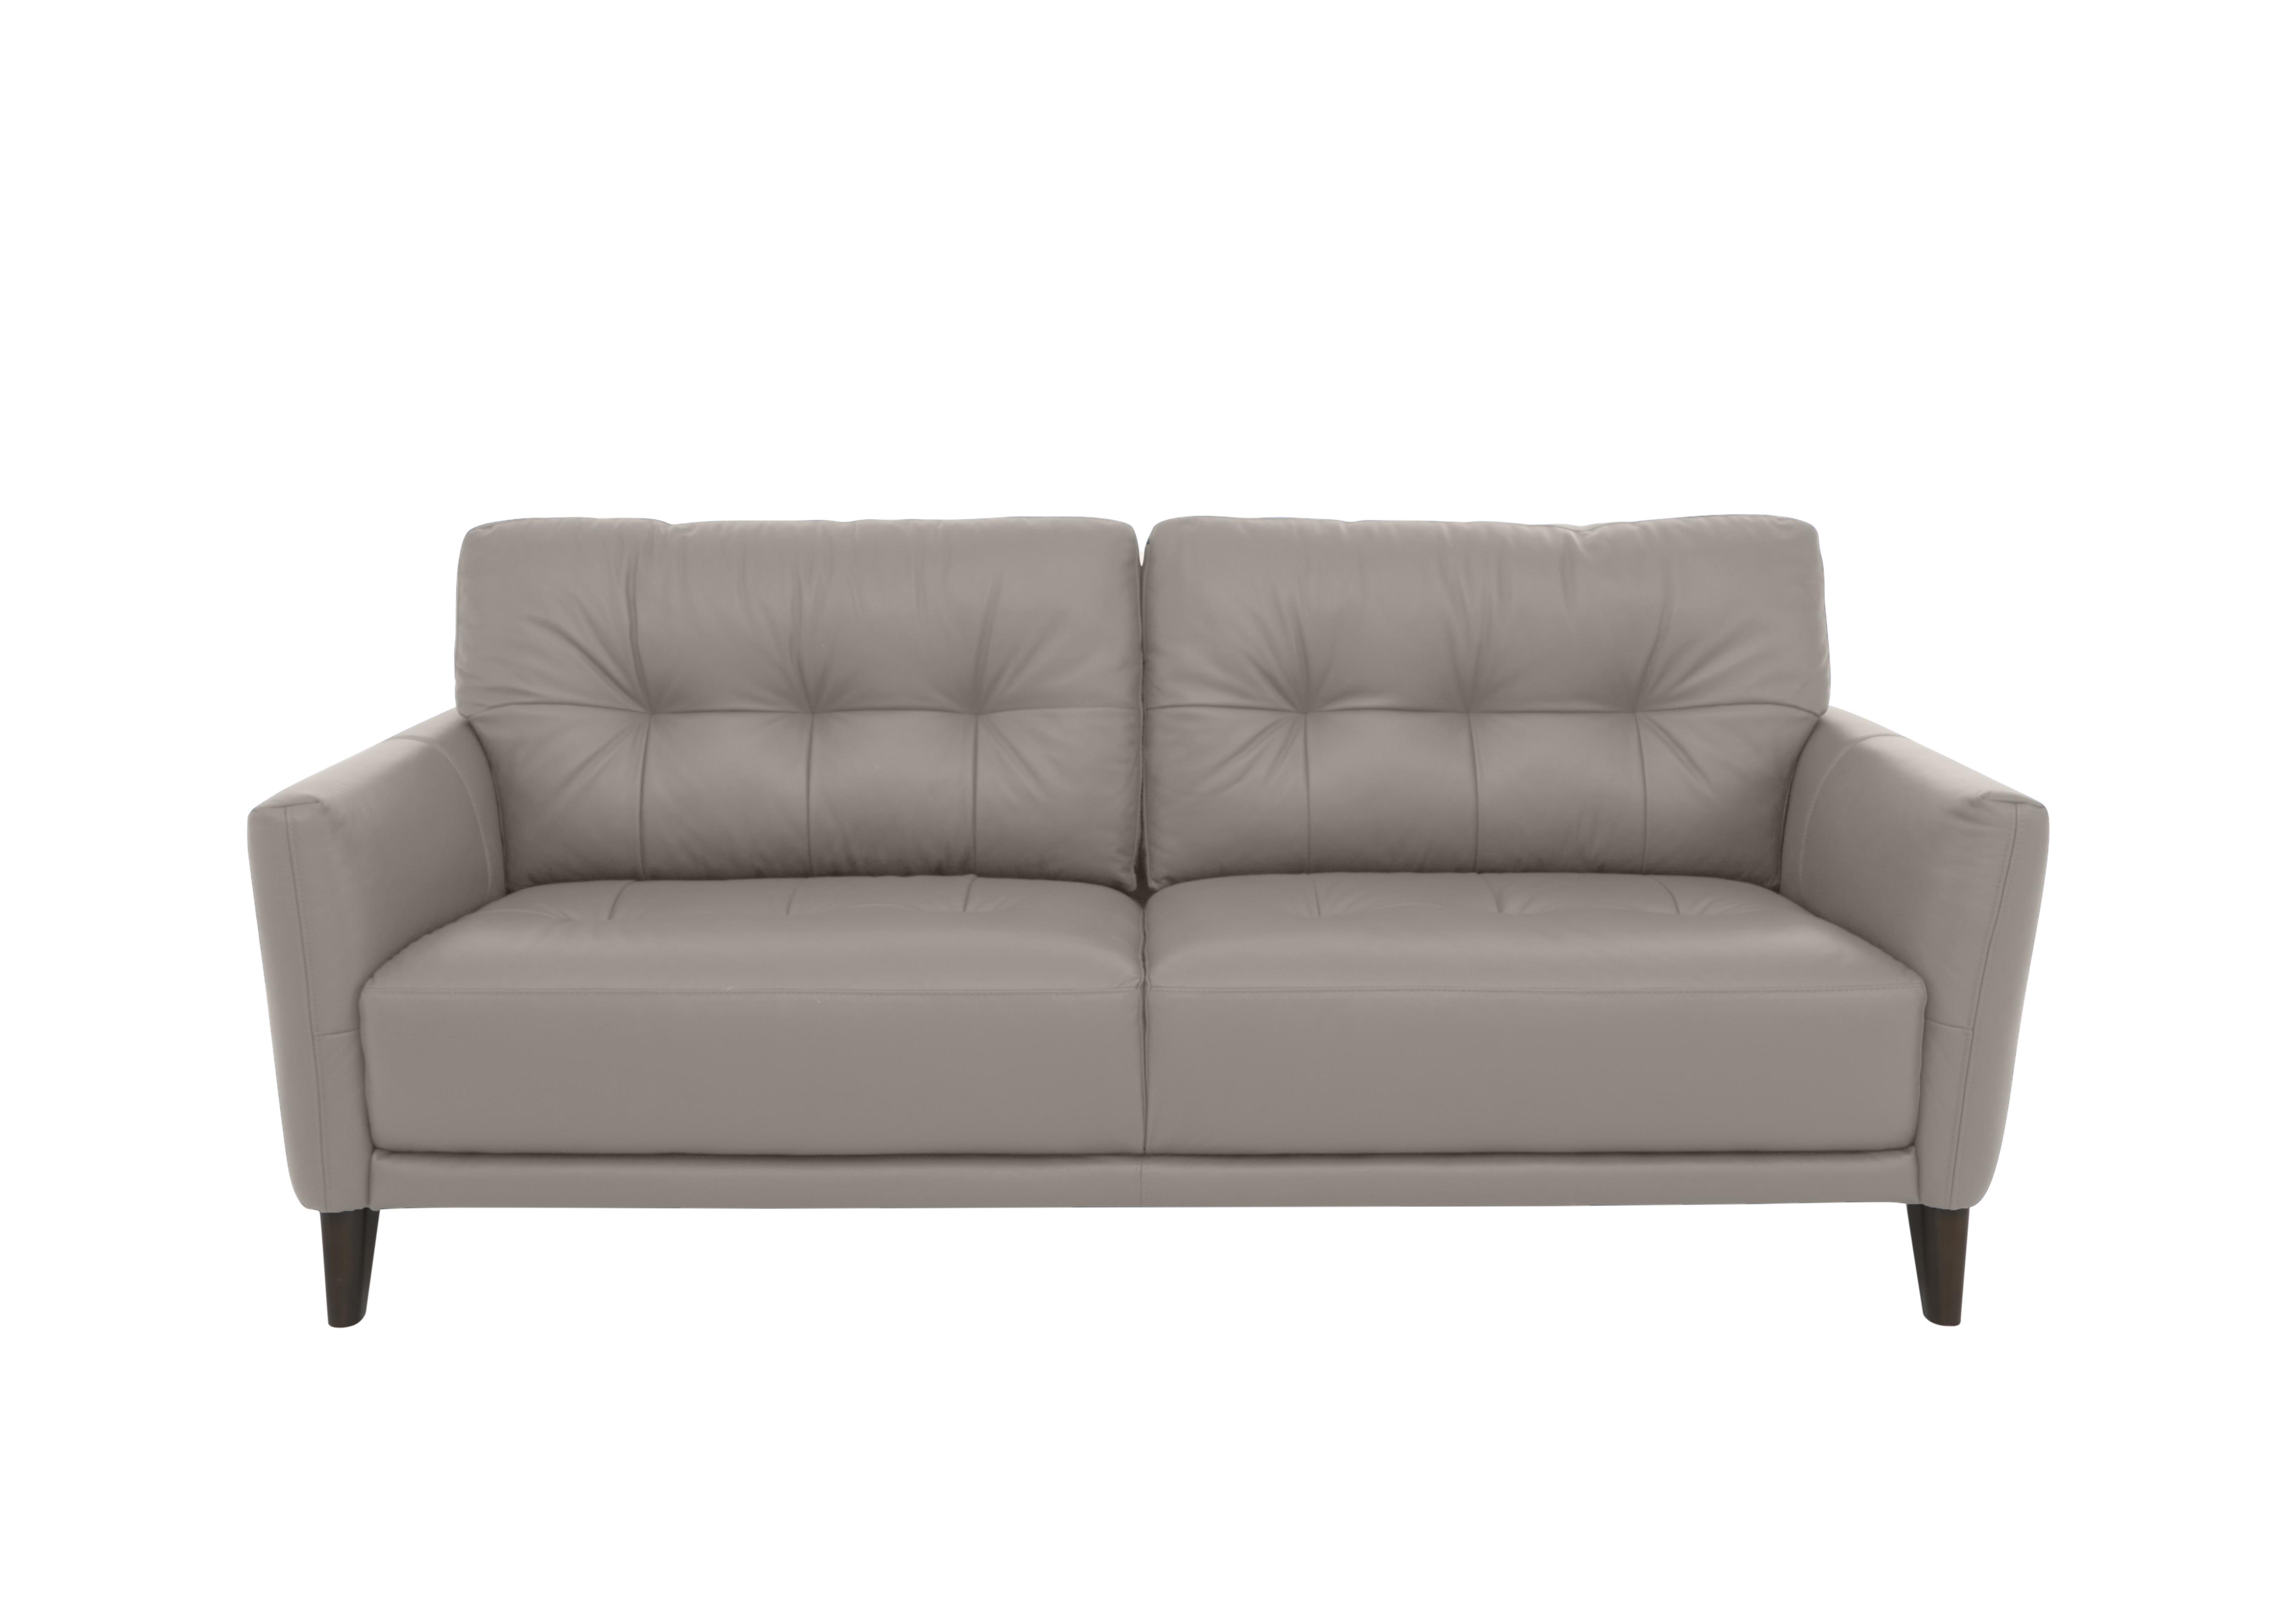 Uno Leather 3 Seater Sofa in Bv-946b Silver Grey on Furniture Village